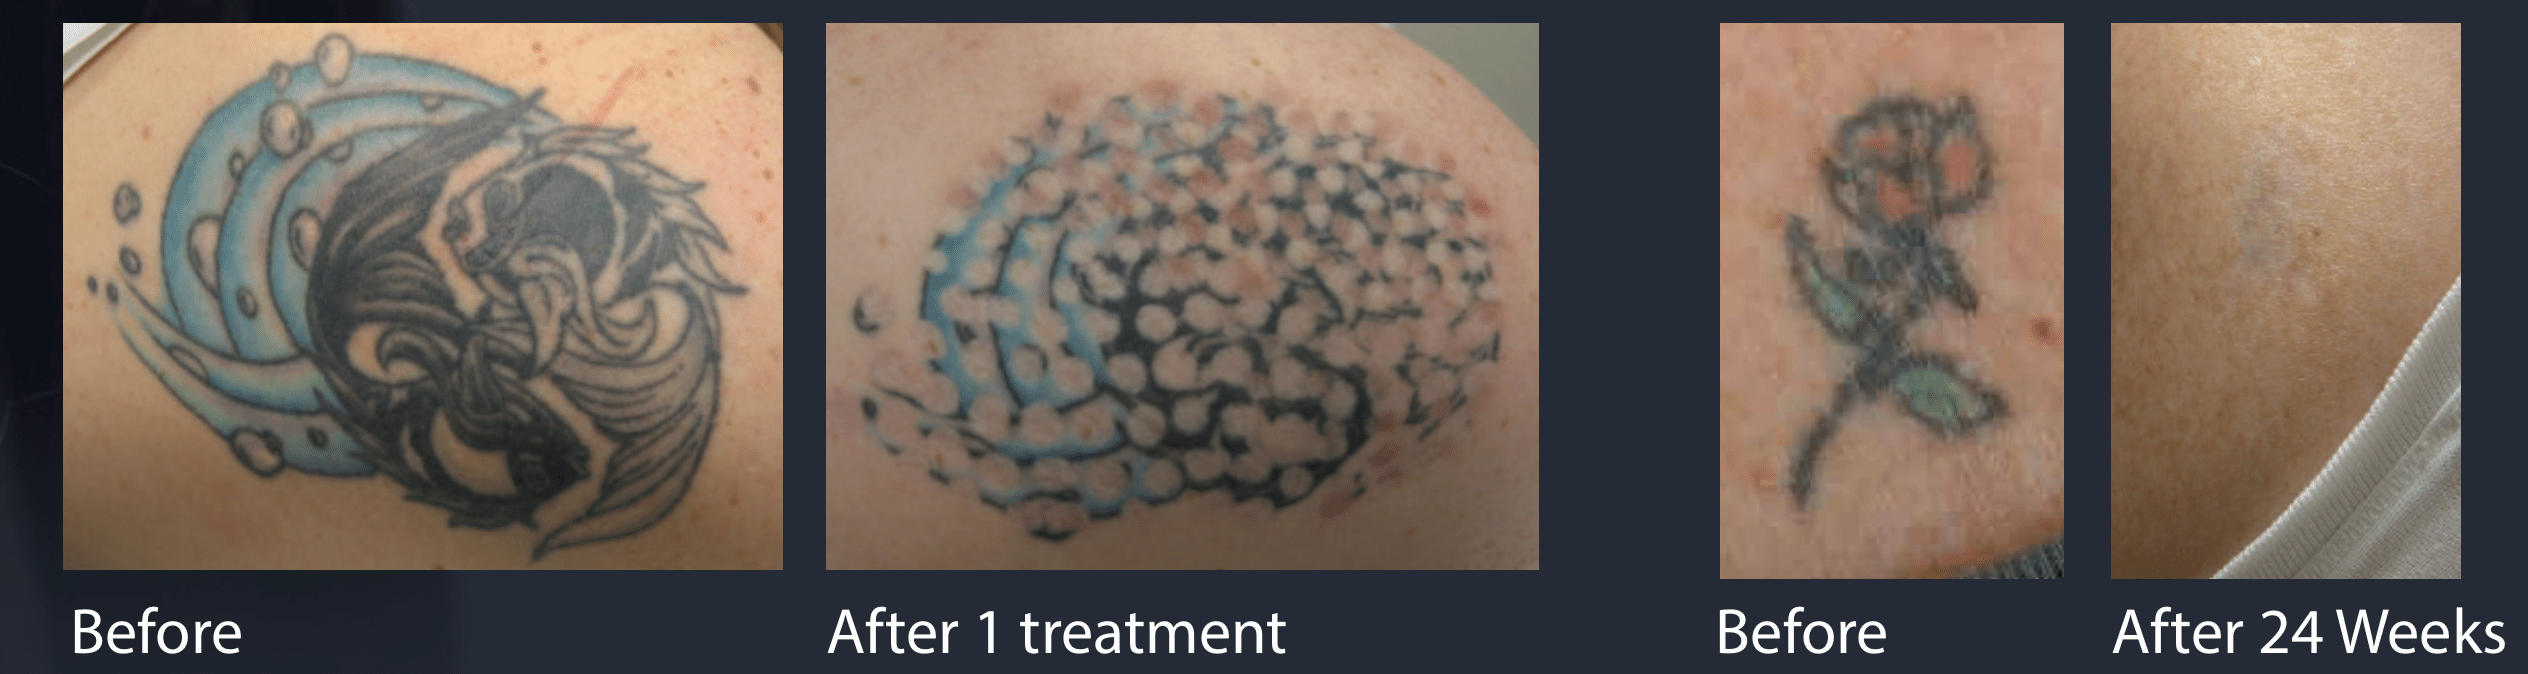 Tattoo Removal - Essential Beauty Medical Spa Foothill Ranch, CA